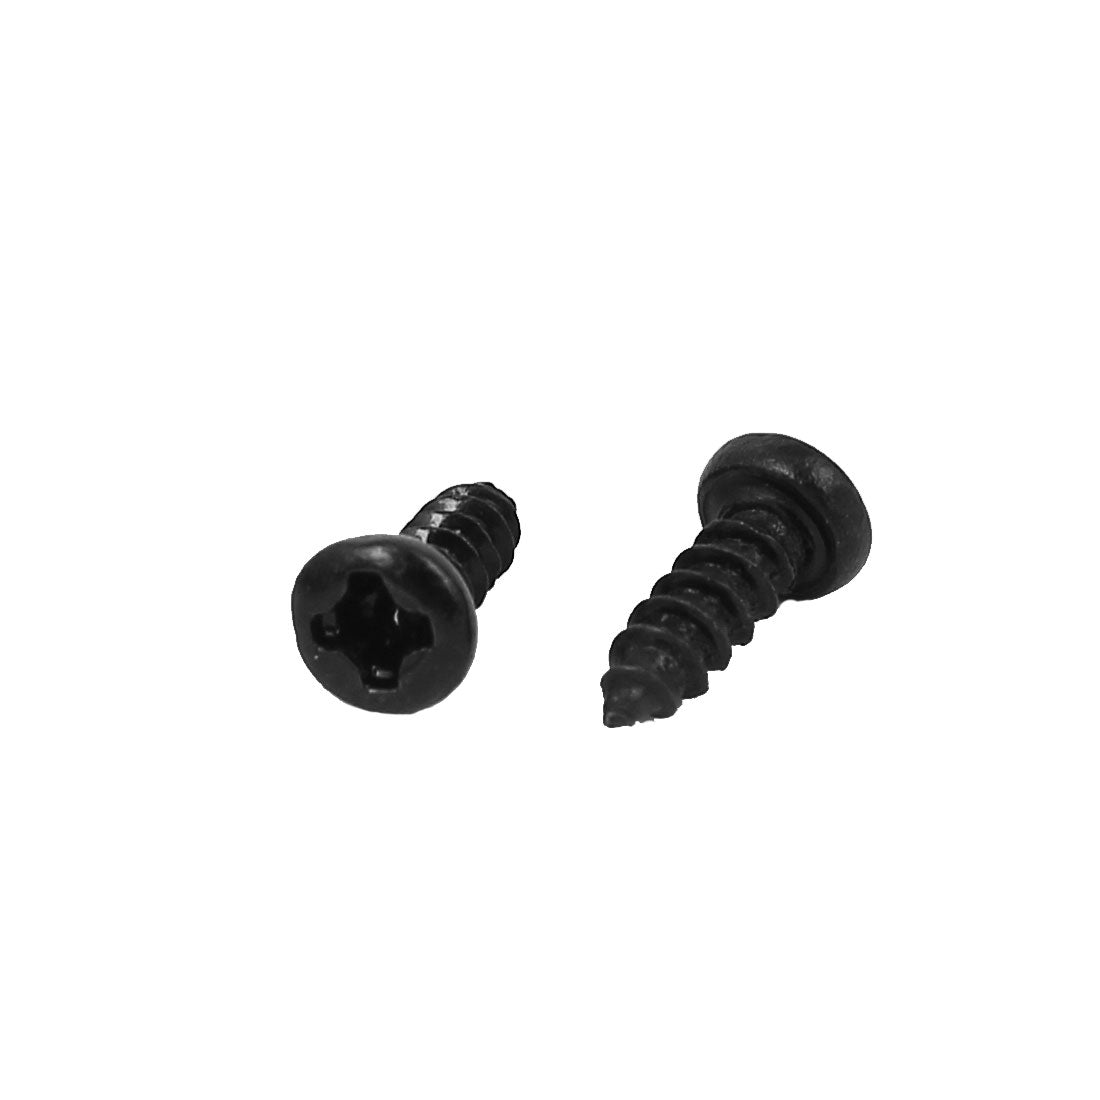 uxcell Uxcell 2mm x 6mm Male Thread Phillips Round Head Metal Self Tapping Screw Black 300 Pcs